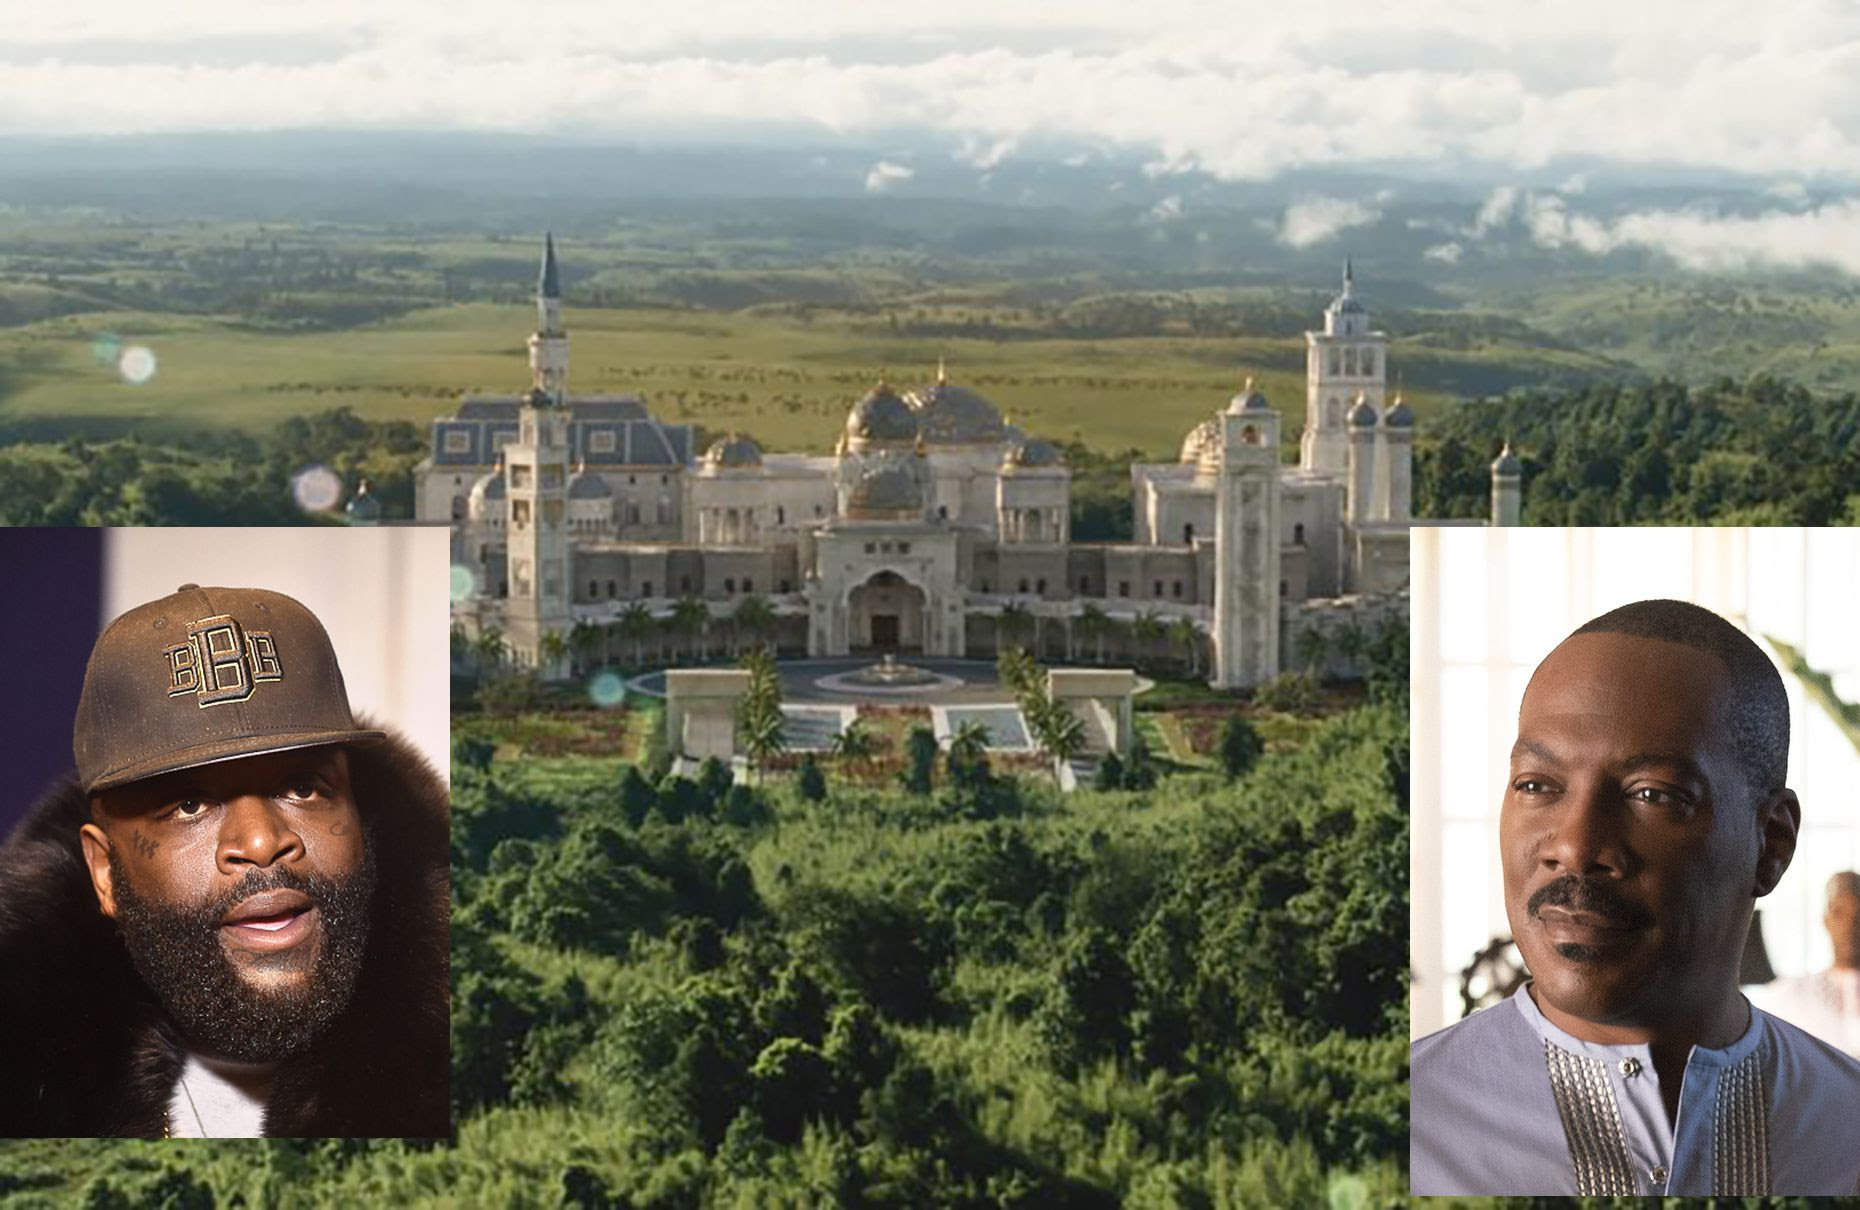 At zamunda we find, invest, develop, produce and distribute these fine products. Coming 2 America Notes Rick Ross Mansion Used As Zamunda Palace Reviews Are Mixed Fashion Designed By Ruth E Carter